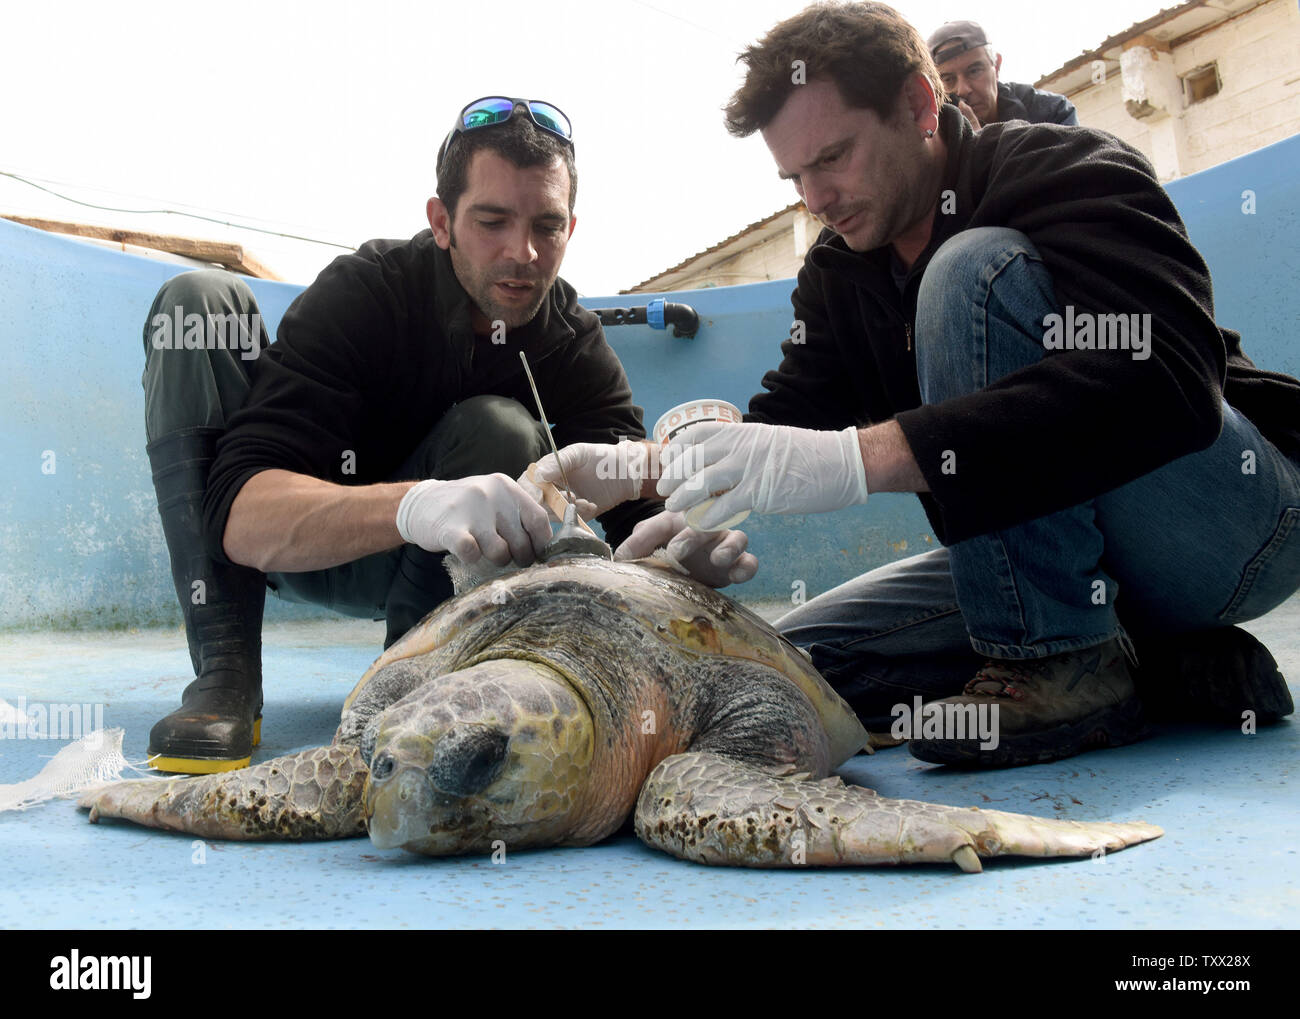 (R) Dr. Yaniv Levy, Director of the Israel Sea Turtle Rescue Center of the Israeli National and Parks Authority, attaches a satellite tracking device to a recovered loggerhead sea turtle in Mikhmoret, Israel, January 20, 2019. The ten year old center is  located on the Mediterranean Sea and saves sea turtles that have washed ashore on the Israel coast. Recently more than forty sea turtles waved ashore suffering from shock wave trauma. The injured sea turtles are given medical care and a safe place to heal, before being released back to the sea. The center is also breeding Green sea turtles. Stock Photo